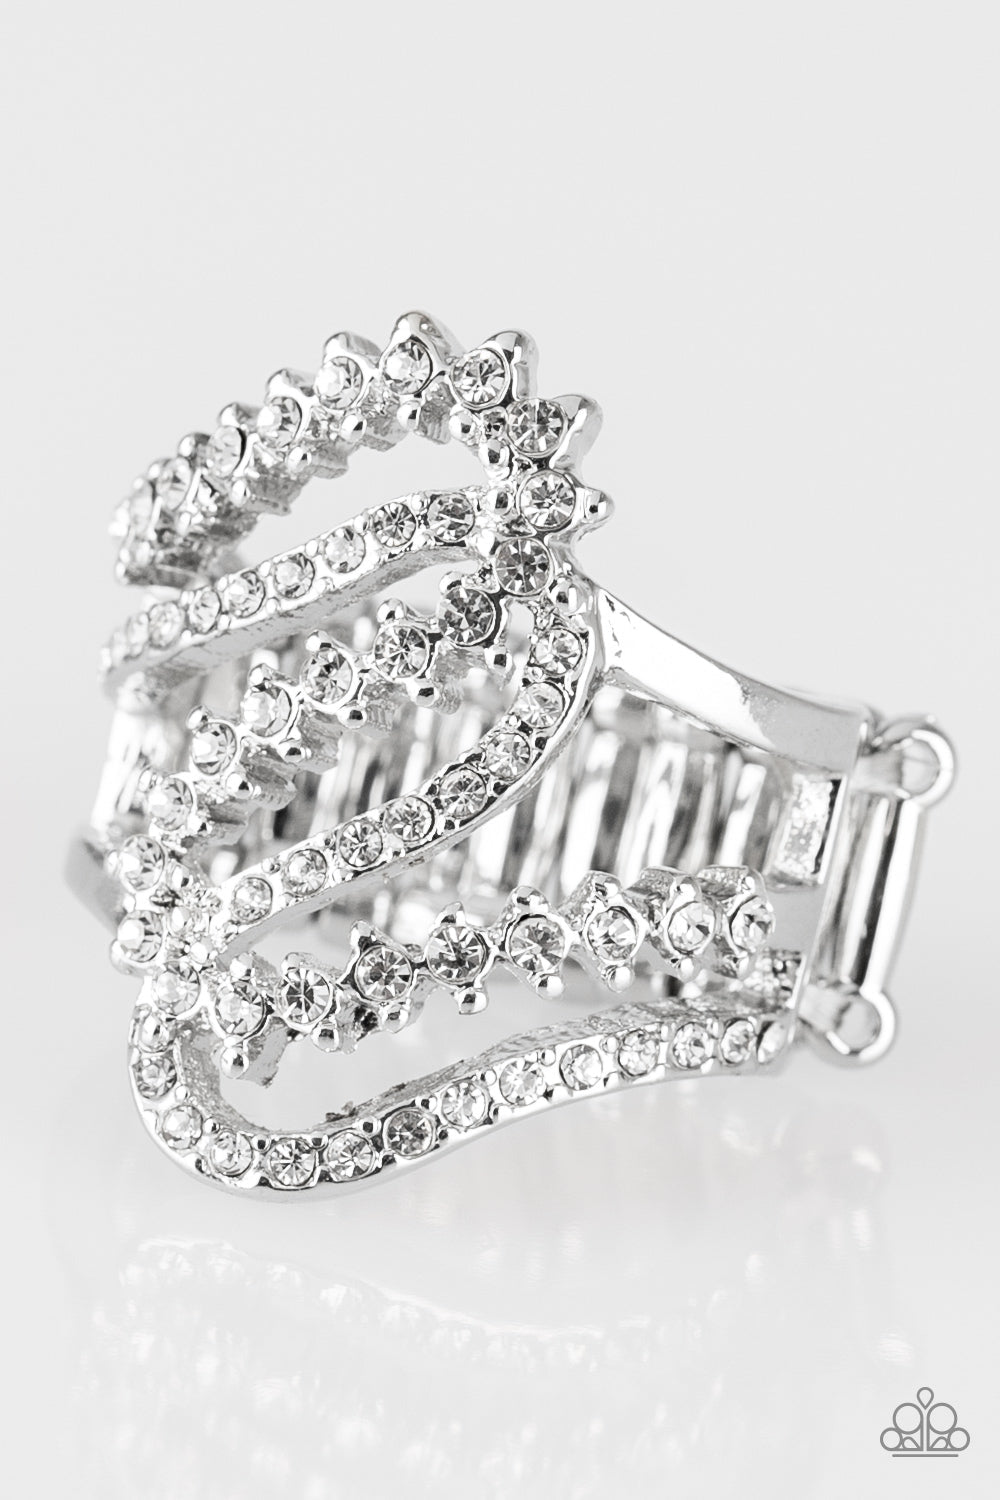 Make Waves - White - Silver Ring - Paparazzi Accessories -Encrusted in dainty white rhinestones, radiant silver ribbons wave across the finger, coalescing into a whimsical band. Features a stretchy band for a flexible fit. Sold as one individual ring.